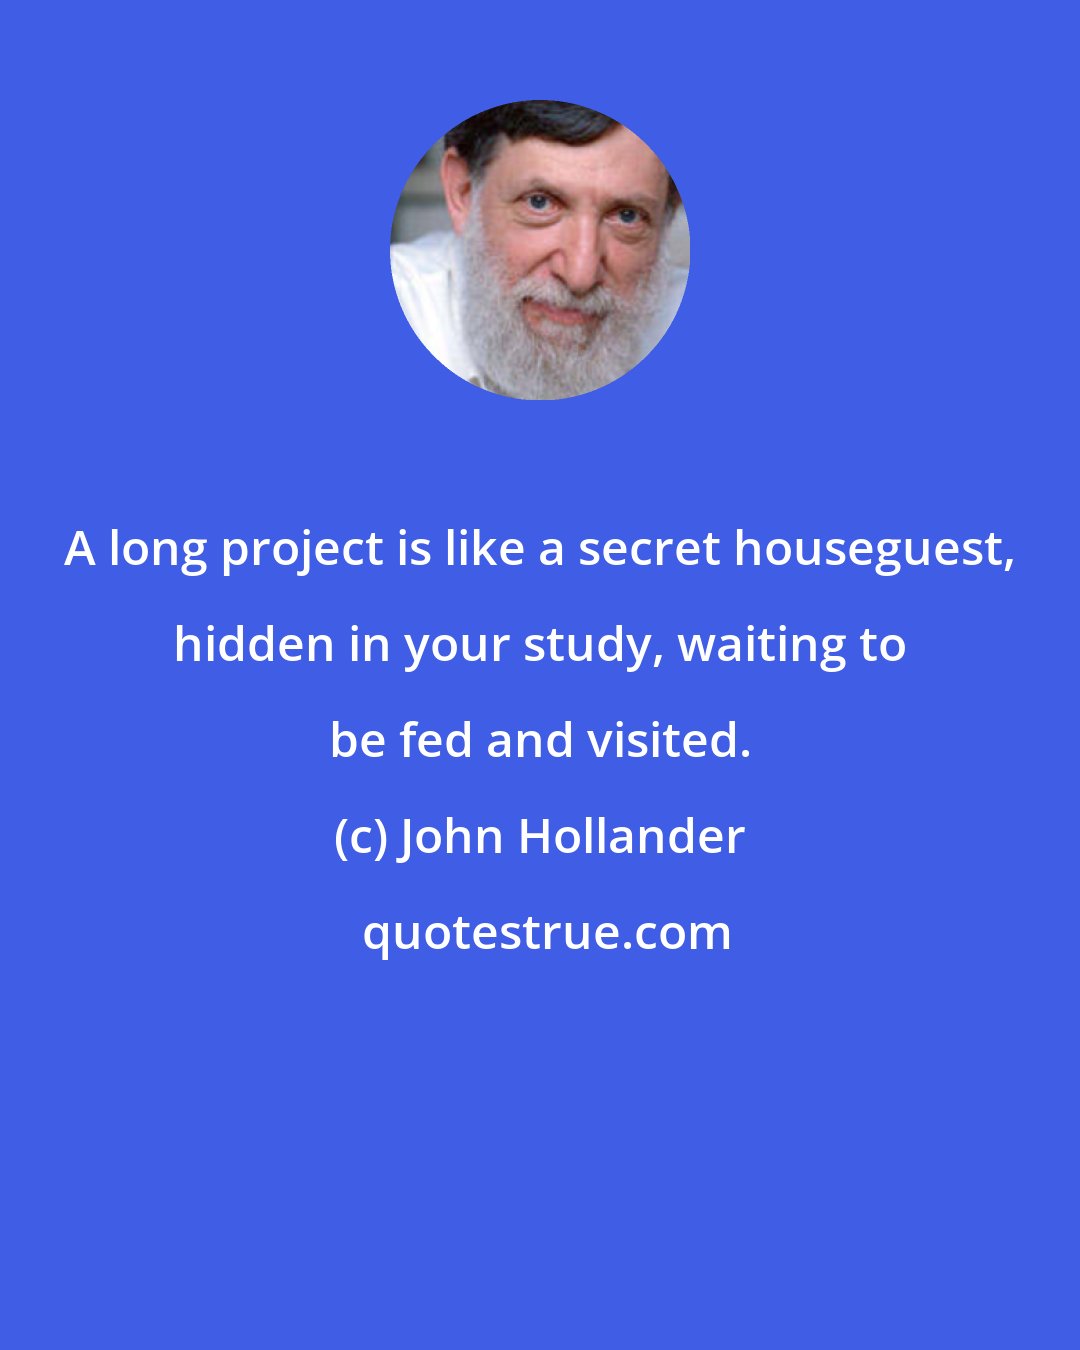 John Hollander: A long project is like a secret houseguest, hidden in your study, waiting to be fed and visited.